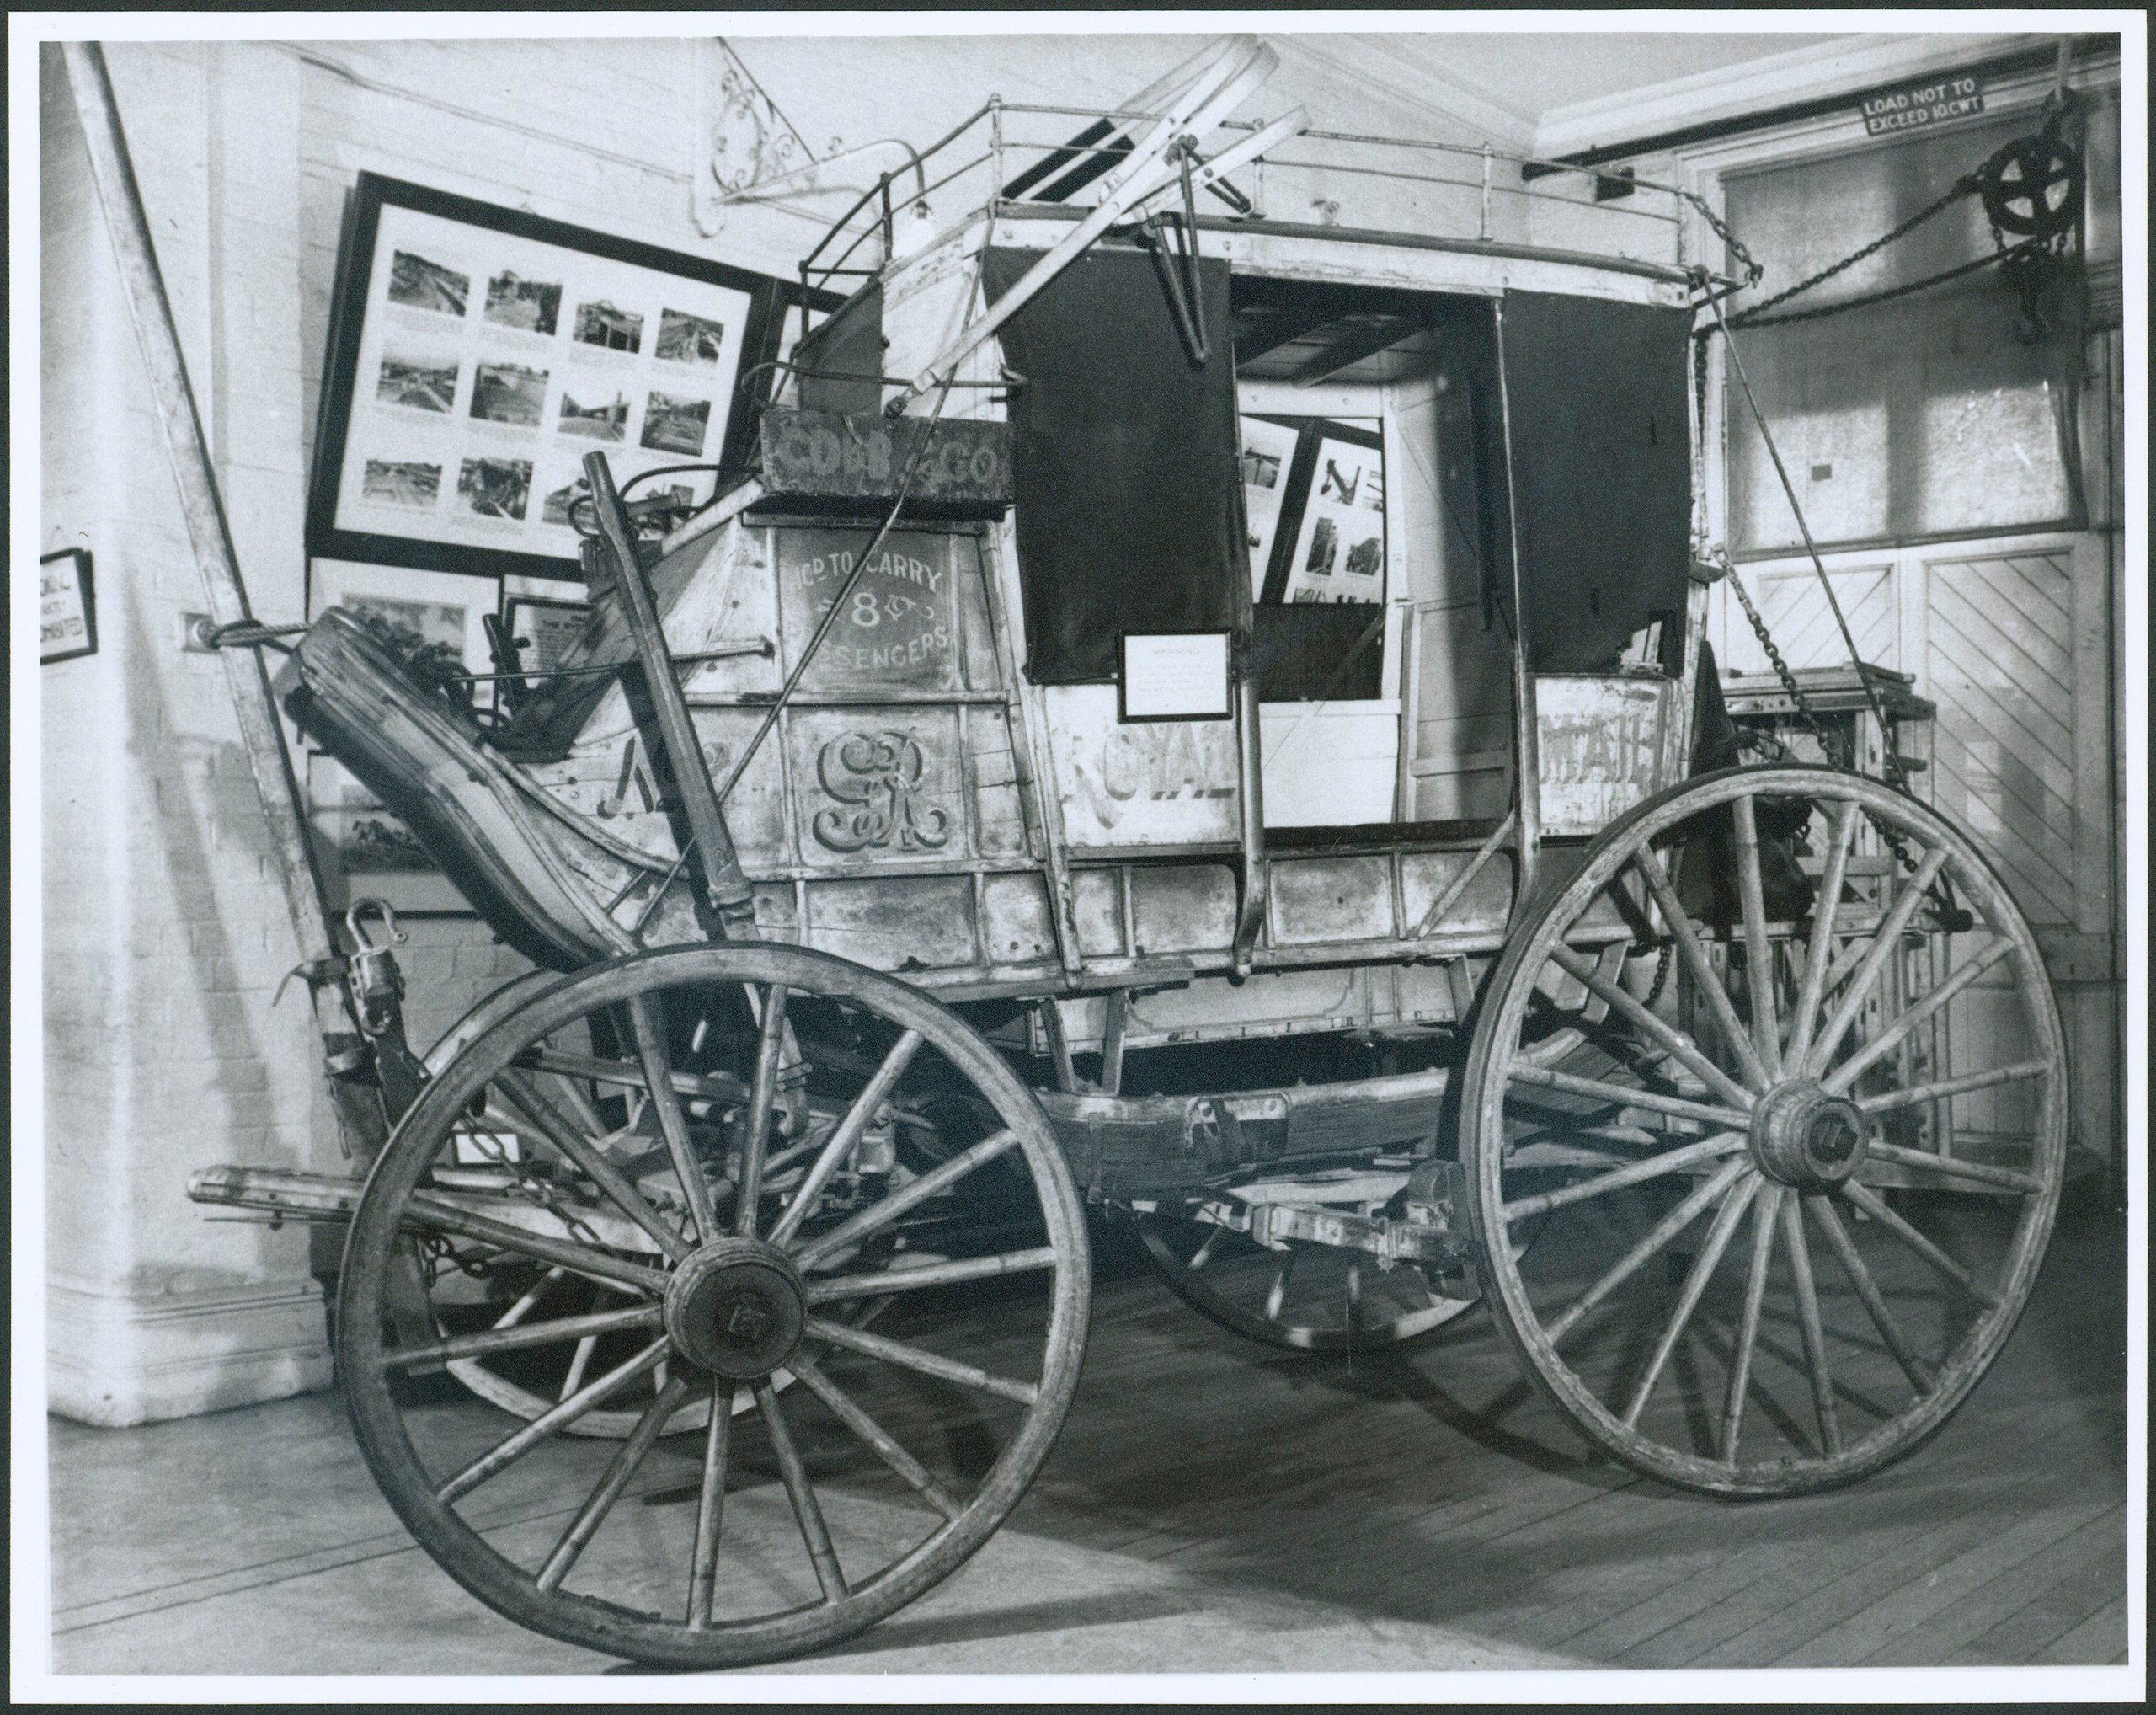 Cobb & Co mail and passenger coach made by Cobb & Co., Charleville, Qld, 1890